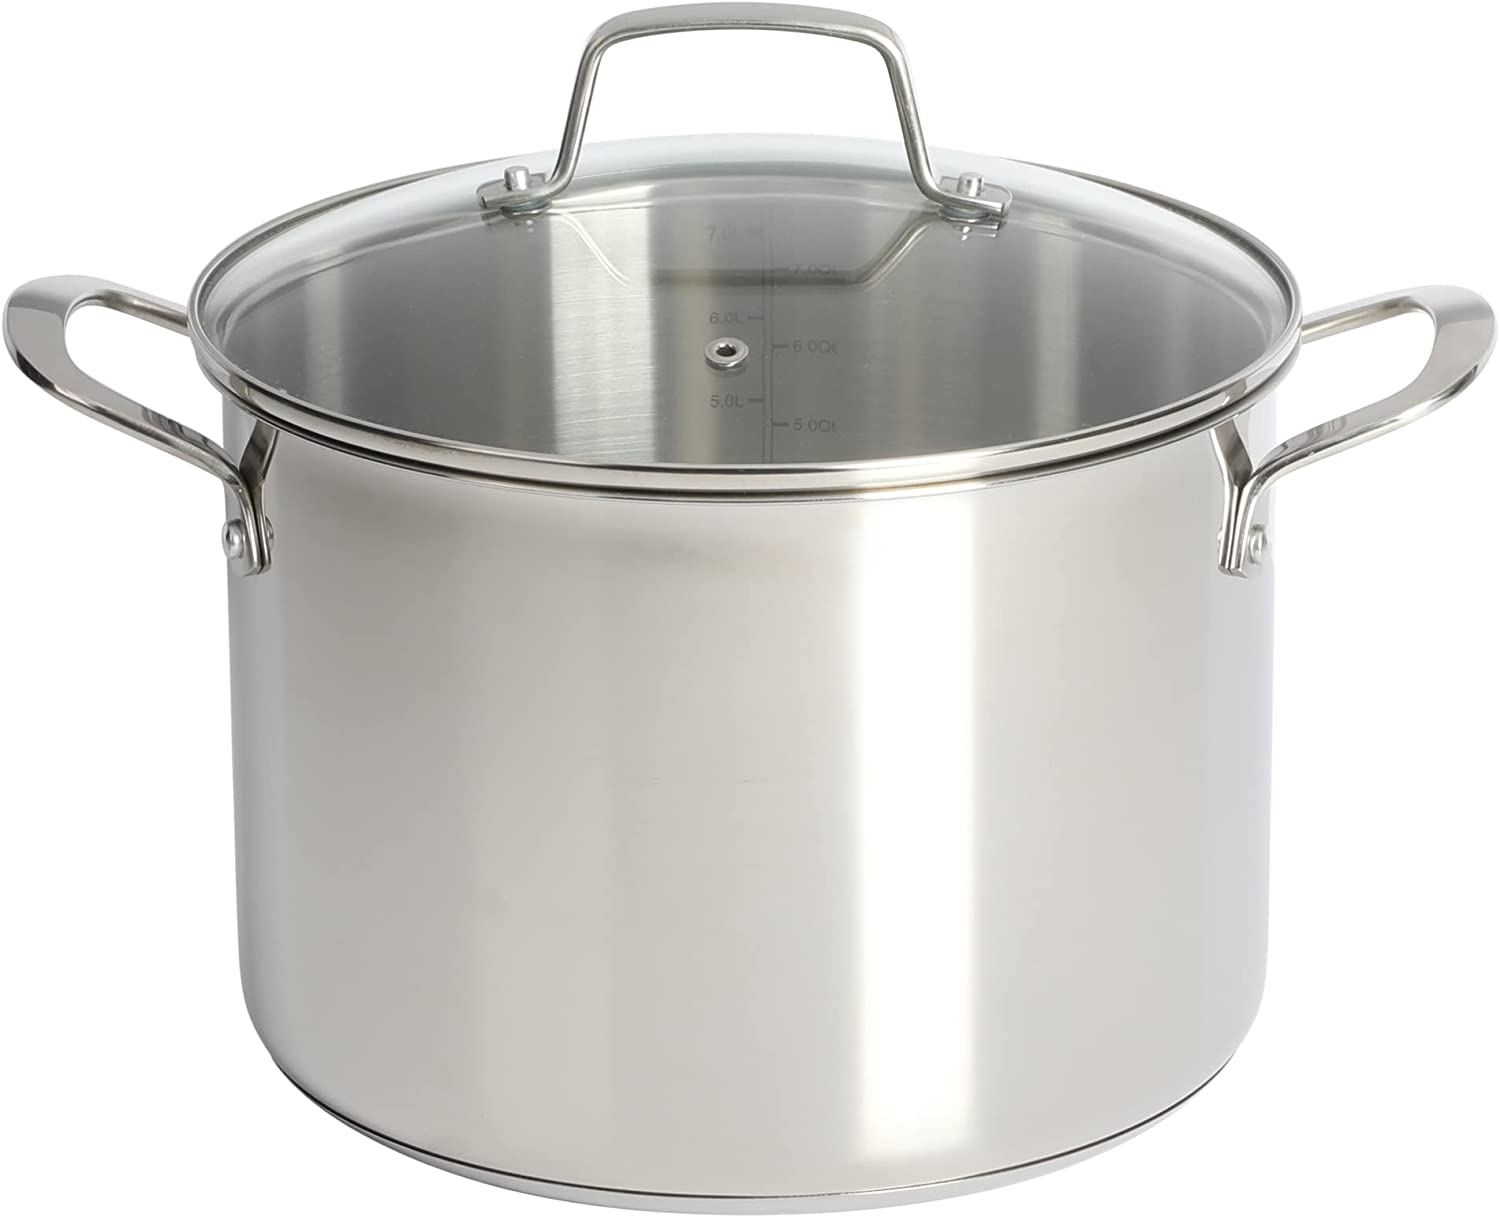 Martha Stewart - The key to any recipe is the right cooking tools,  including high-quality pots and pans. Refresh your kitchen supplies with  Martha's 10-piece Castelle cookware set, on sale for Memorial